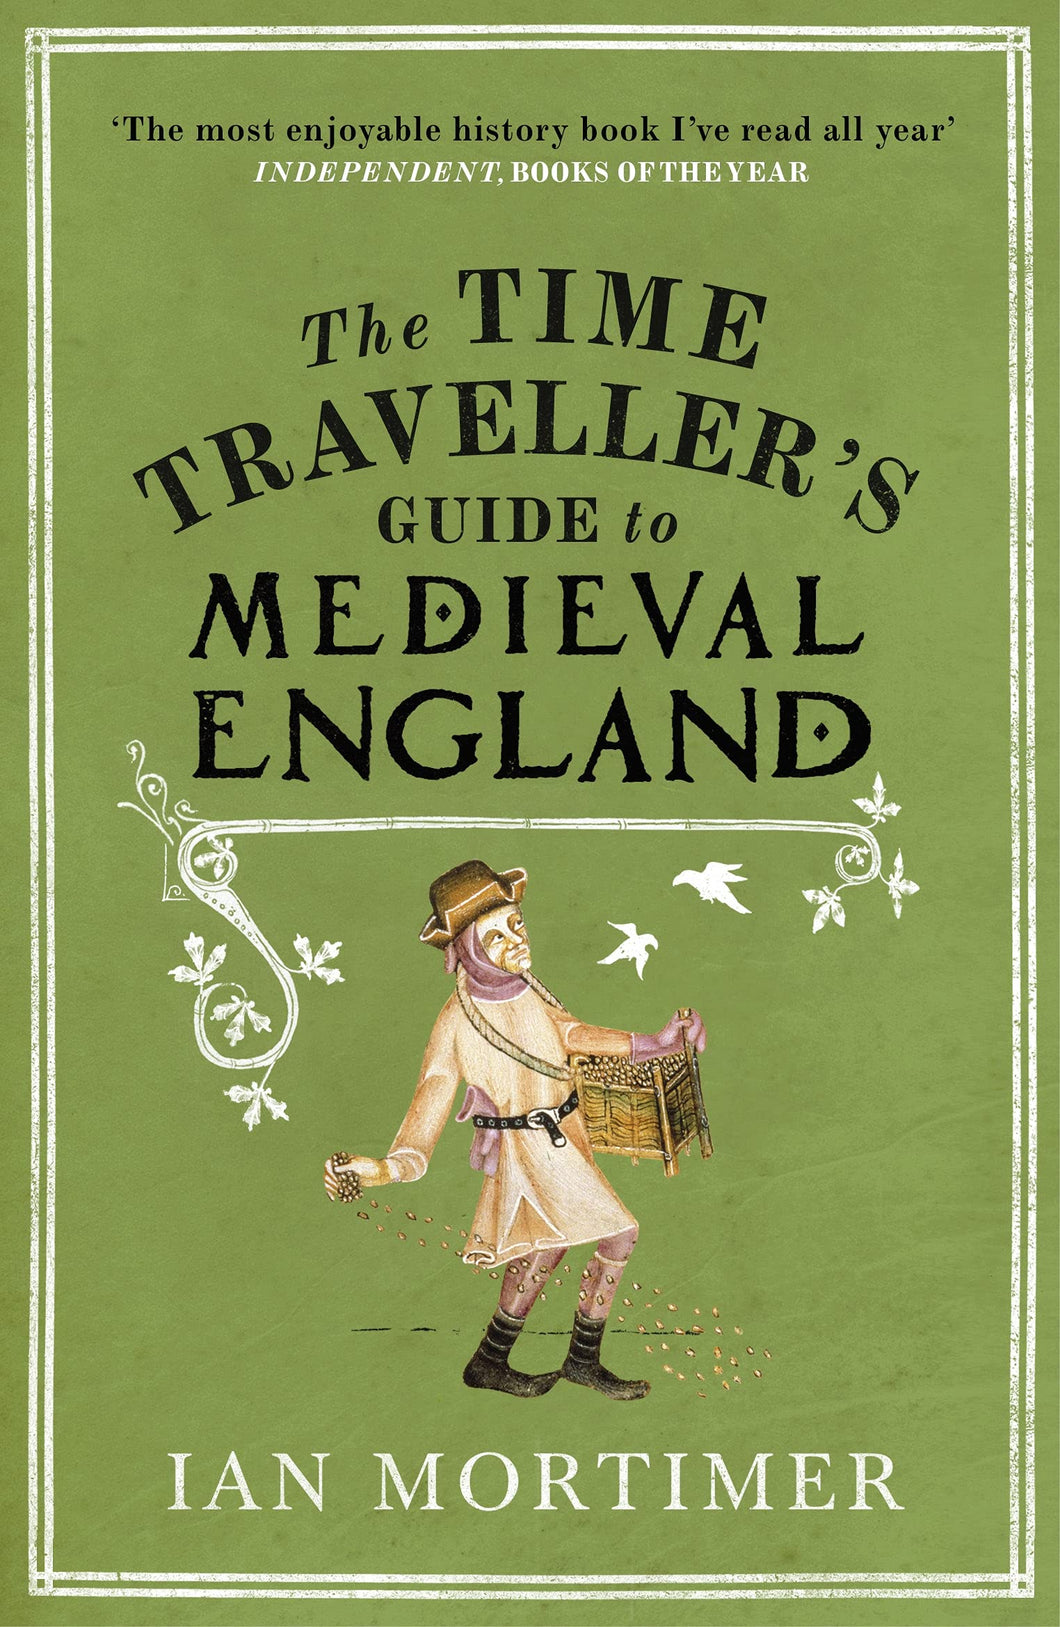 The Time Travellers Guide to Medieval England by Ian Mortimer